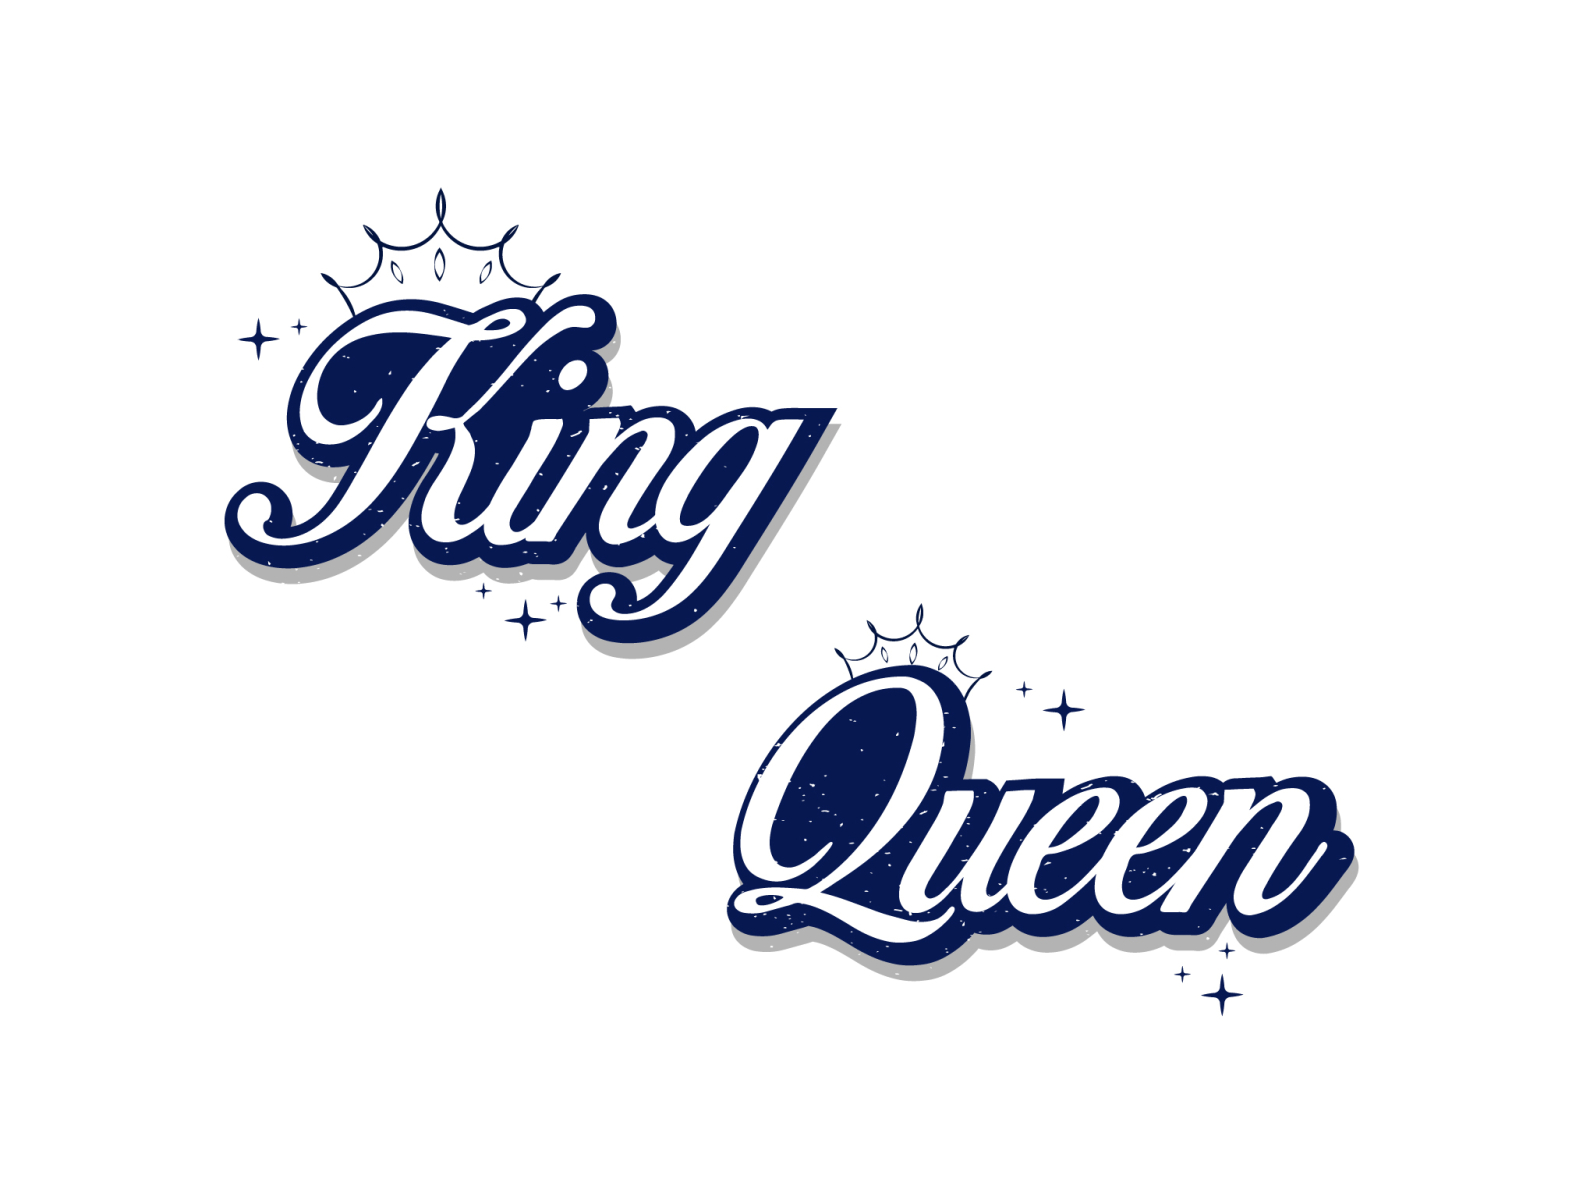 This is a king queen t shirt design 01 by Samira Akter on Dribbble